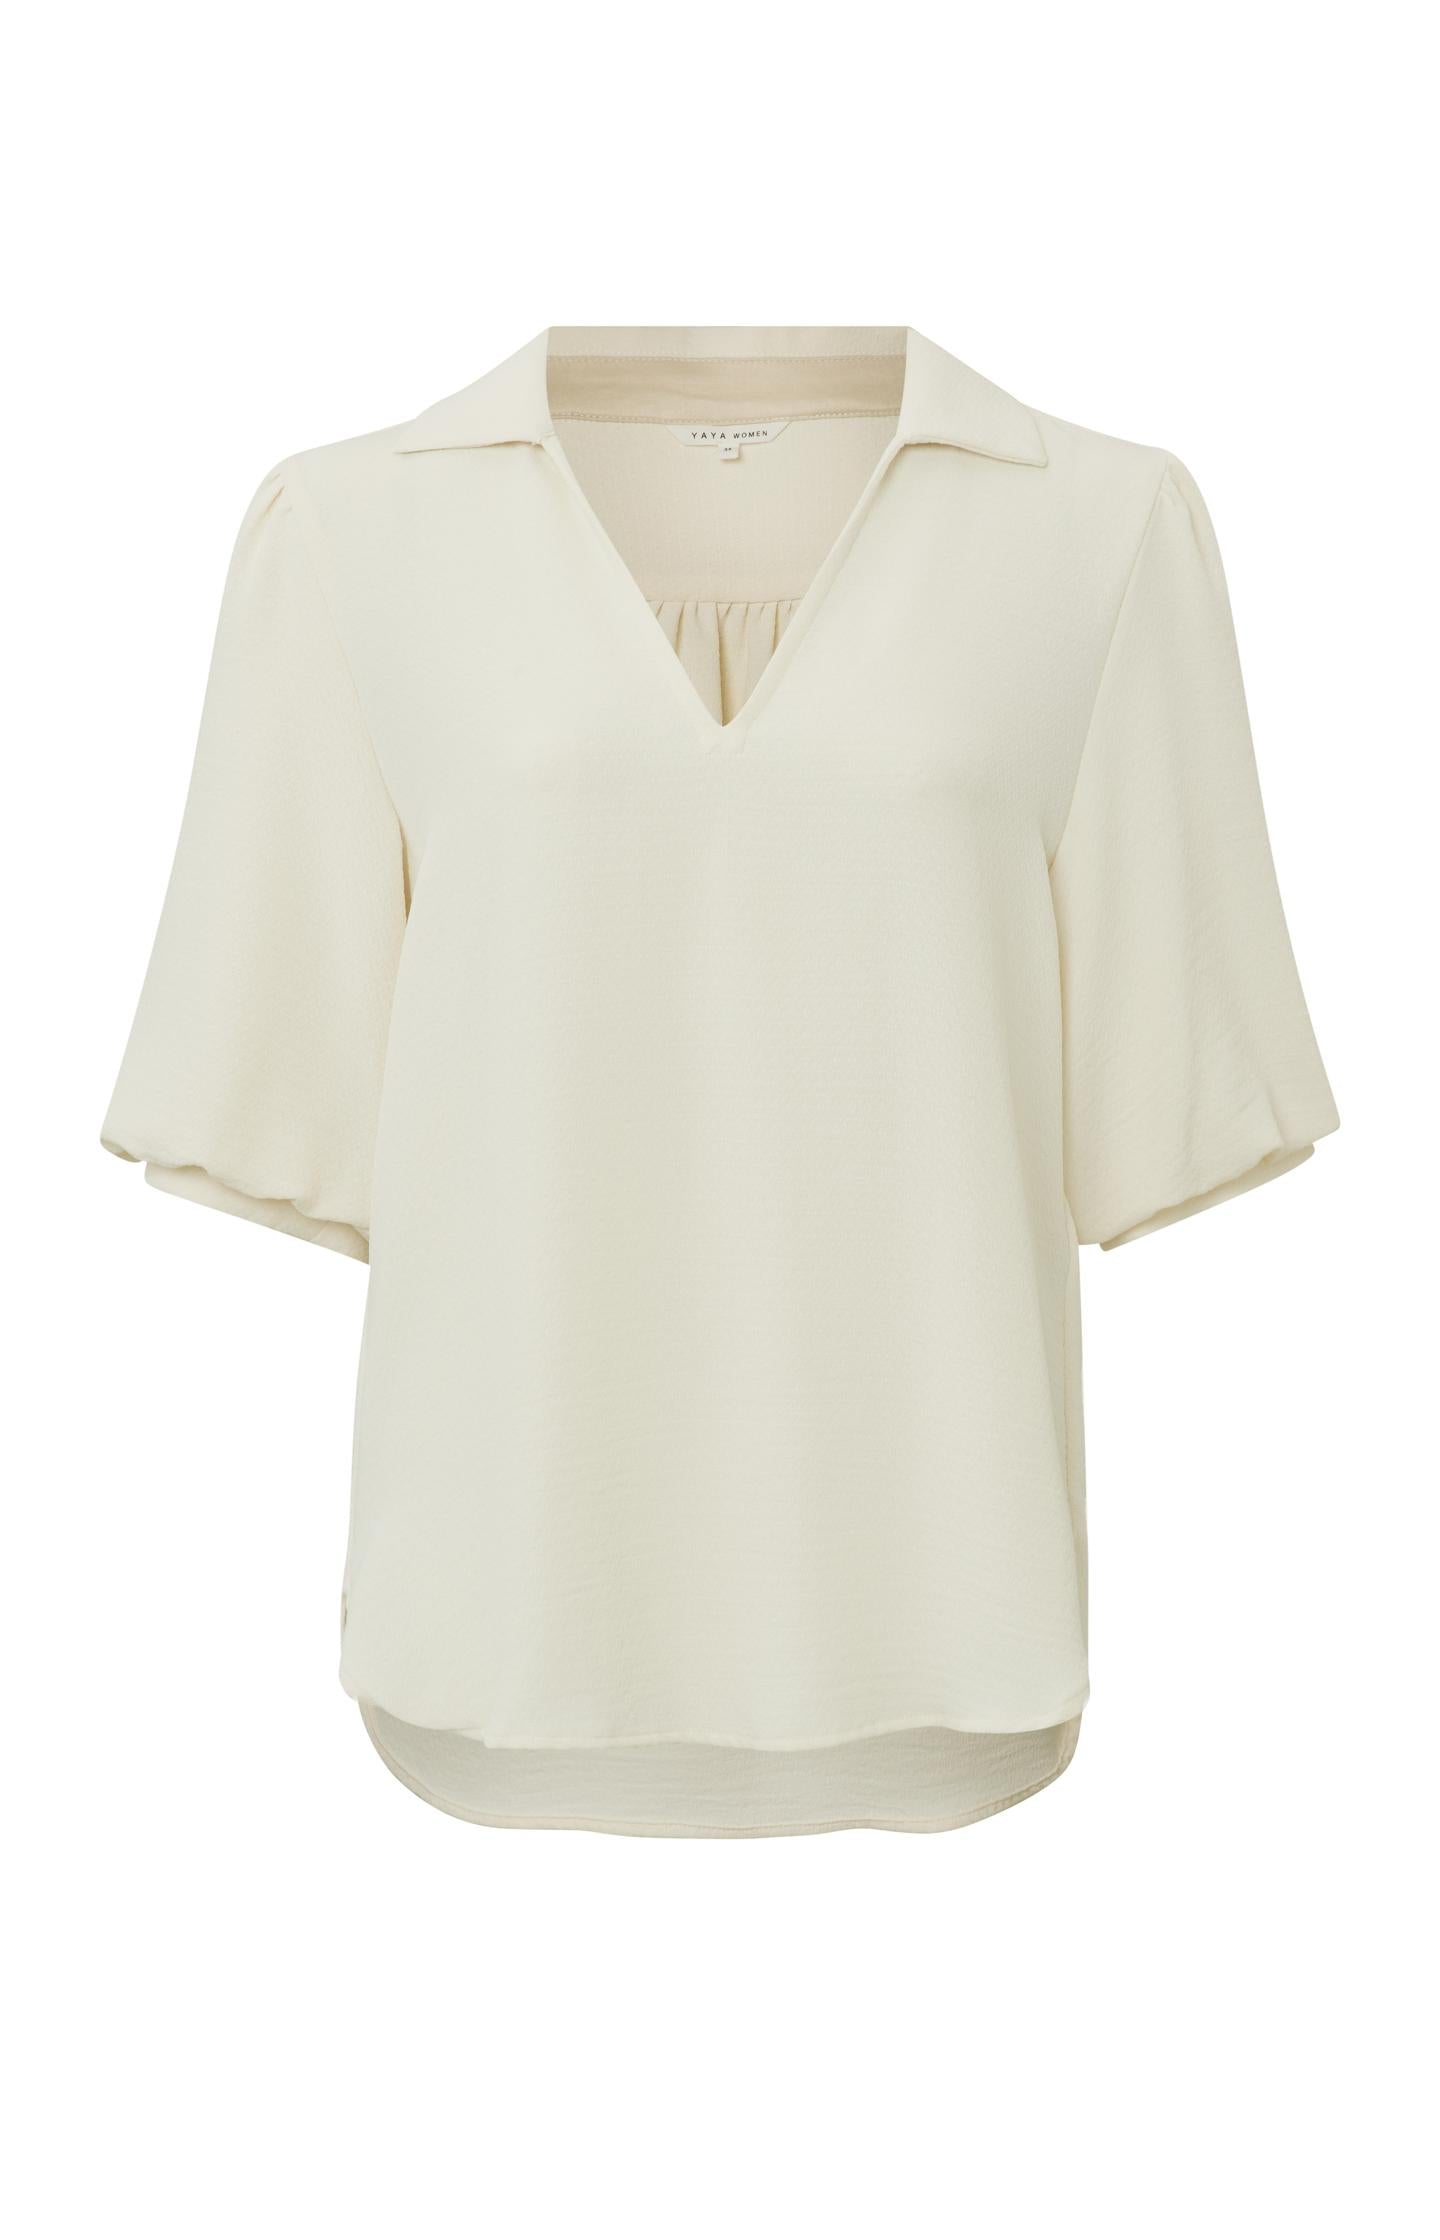 Tunic top with V-neck and short puff sleeves in wide fit - Type: product